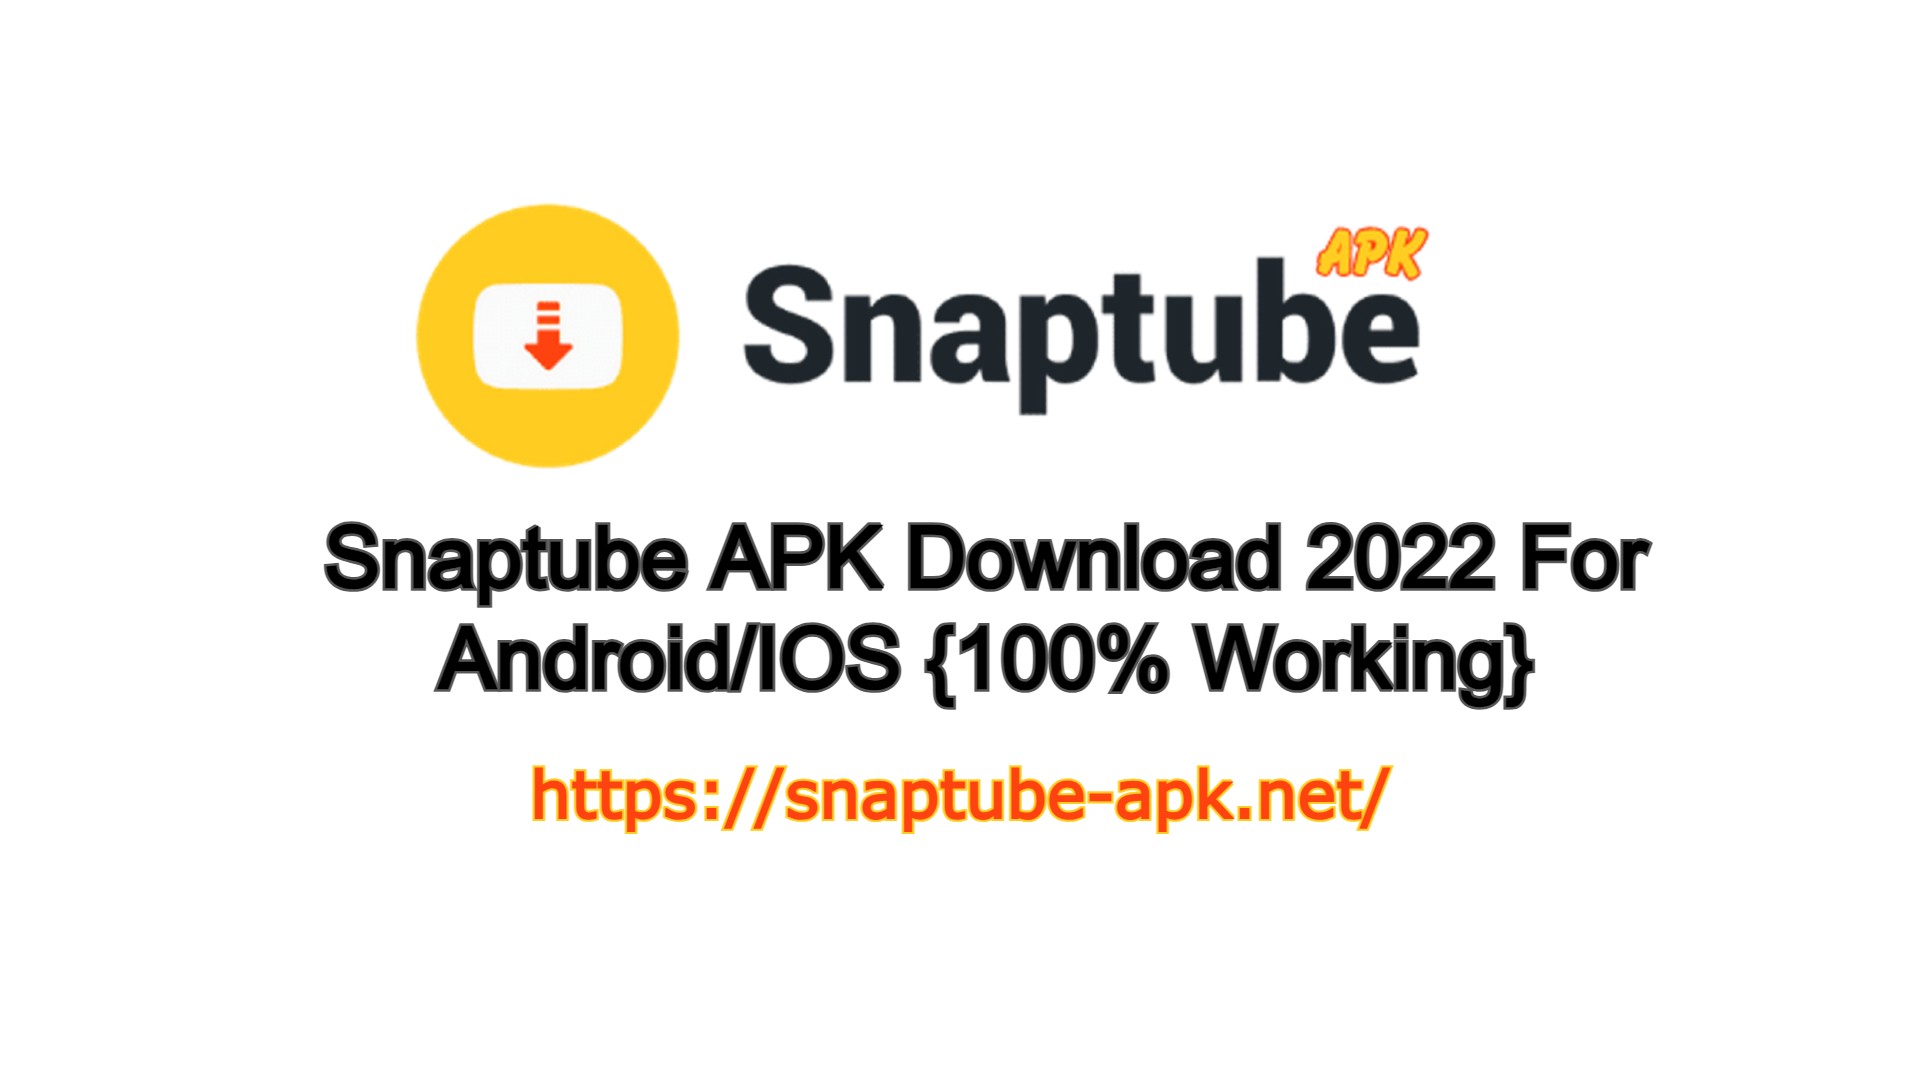 Snaptube APK Download 2022 For Android/IOS {100% Working}